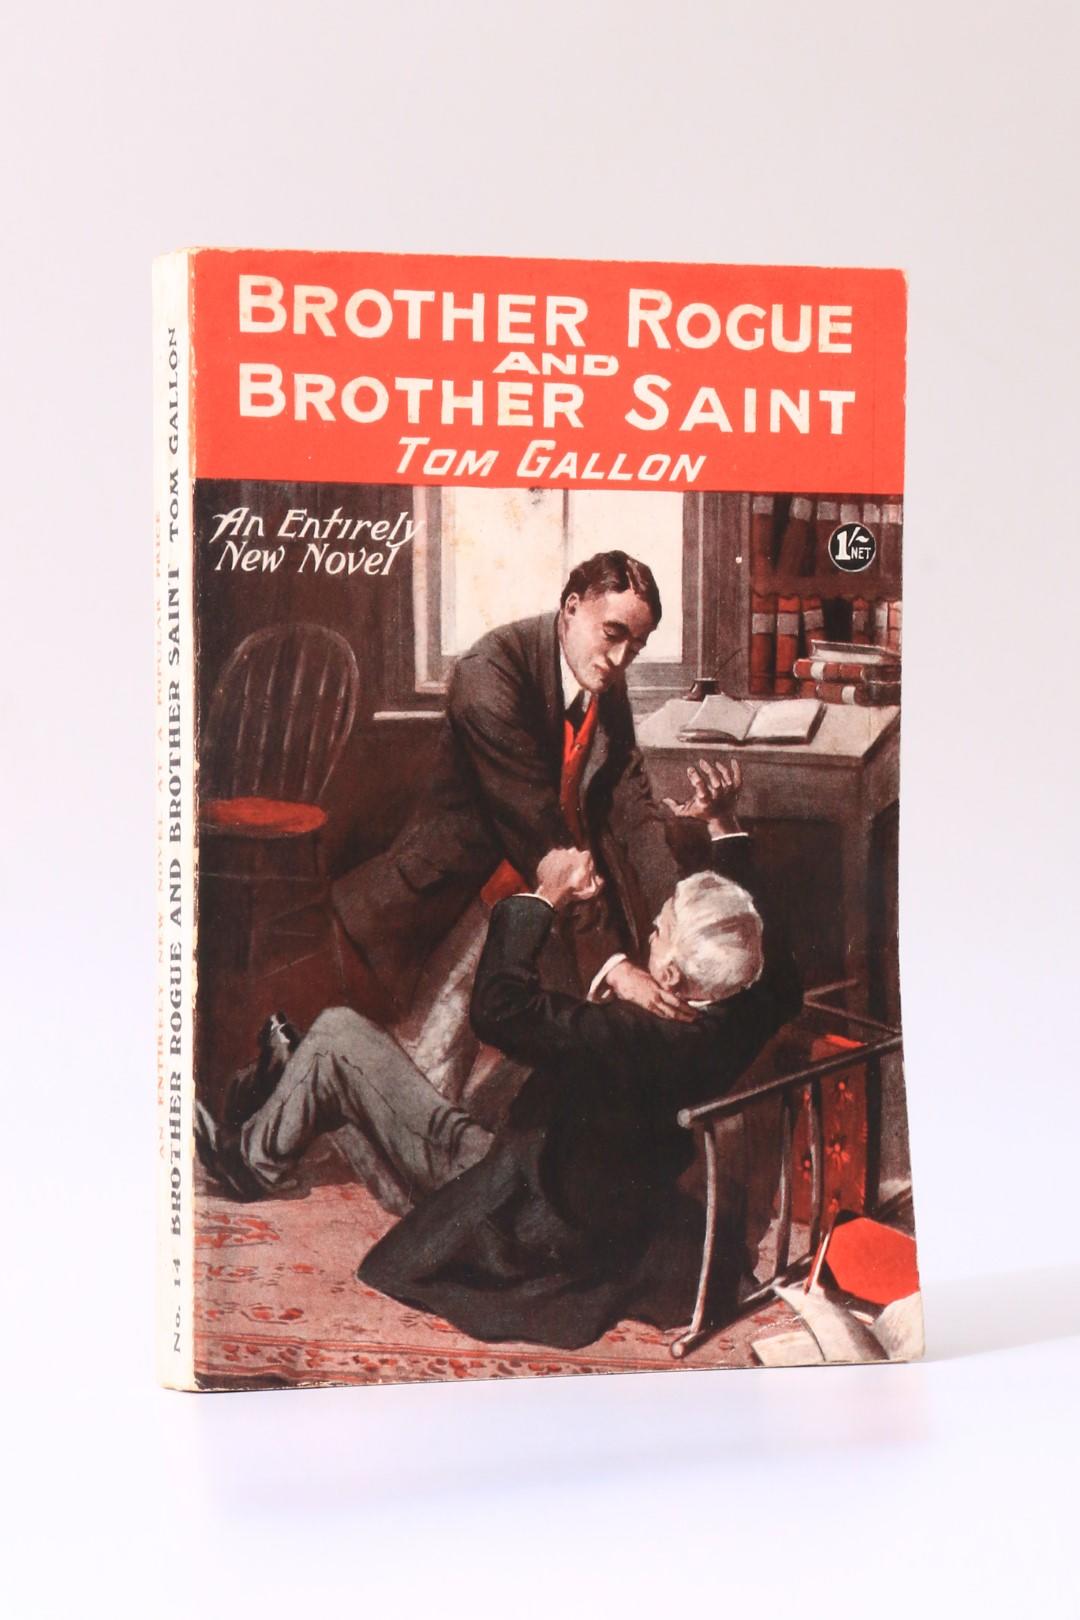 Tom Gallon - Brother Rogue and Brother Saint - Stanley Paul, n.d. [1909], First Edition.